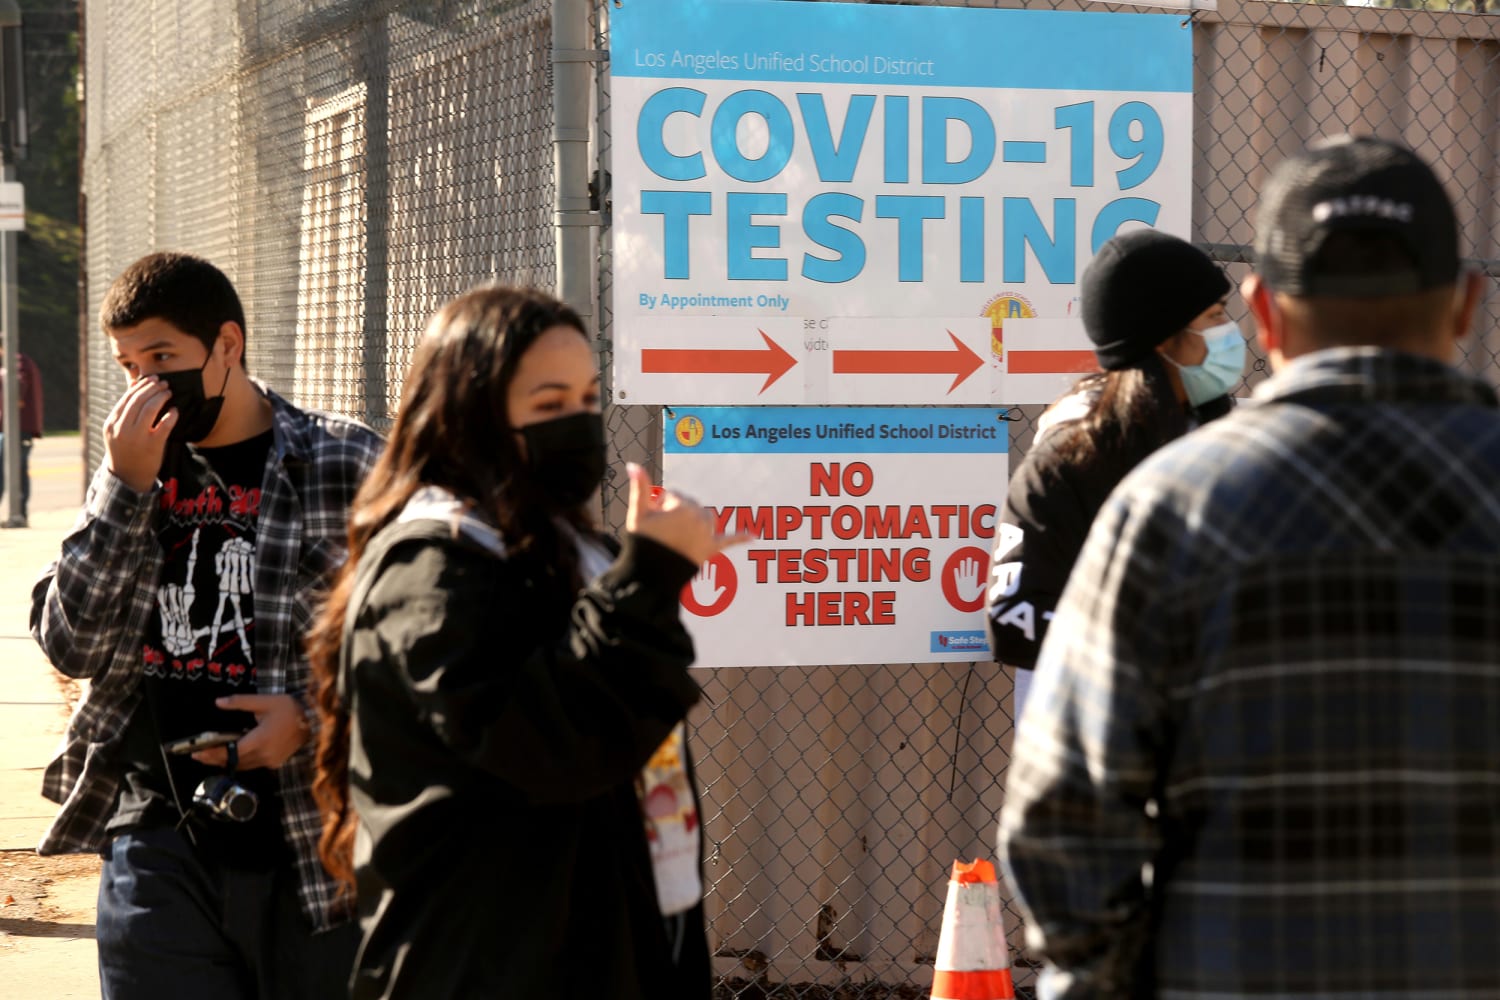 White House vows to provide 10 million Covid tests for schools each month